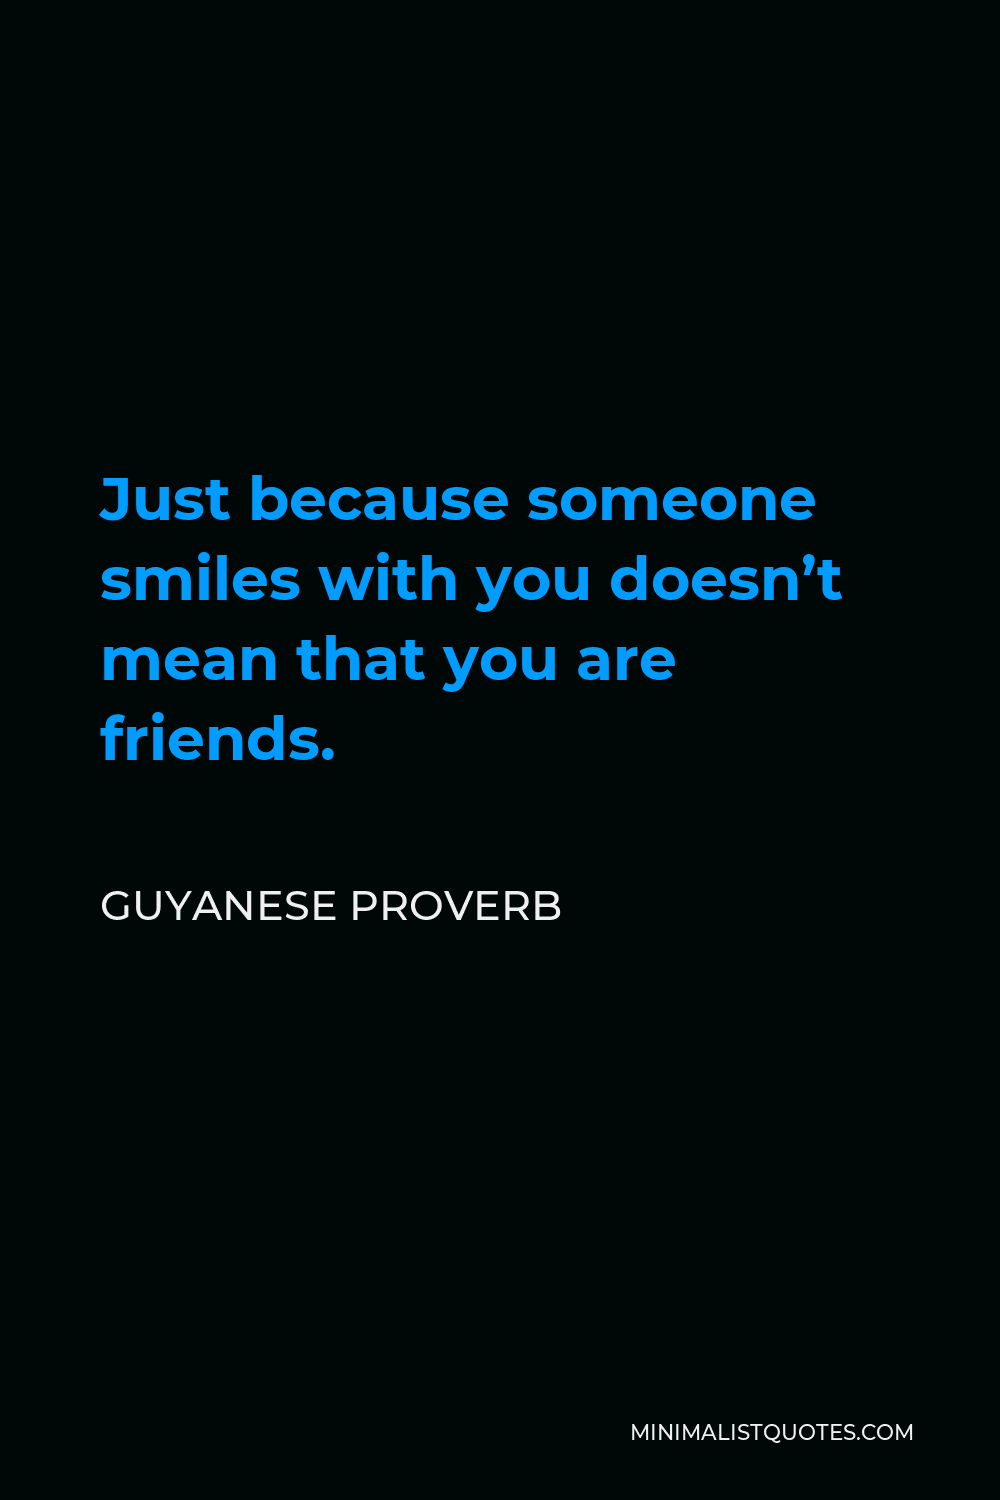 Guyanese Proverb Quote - Just because someone smiles with you doesn’t mean that you are friends.